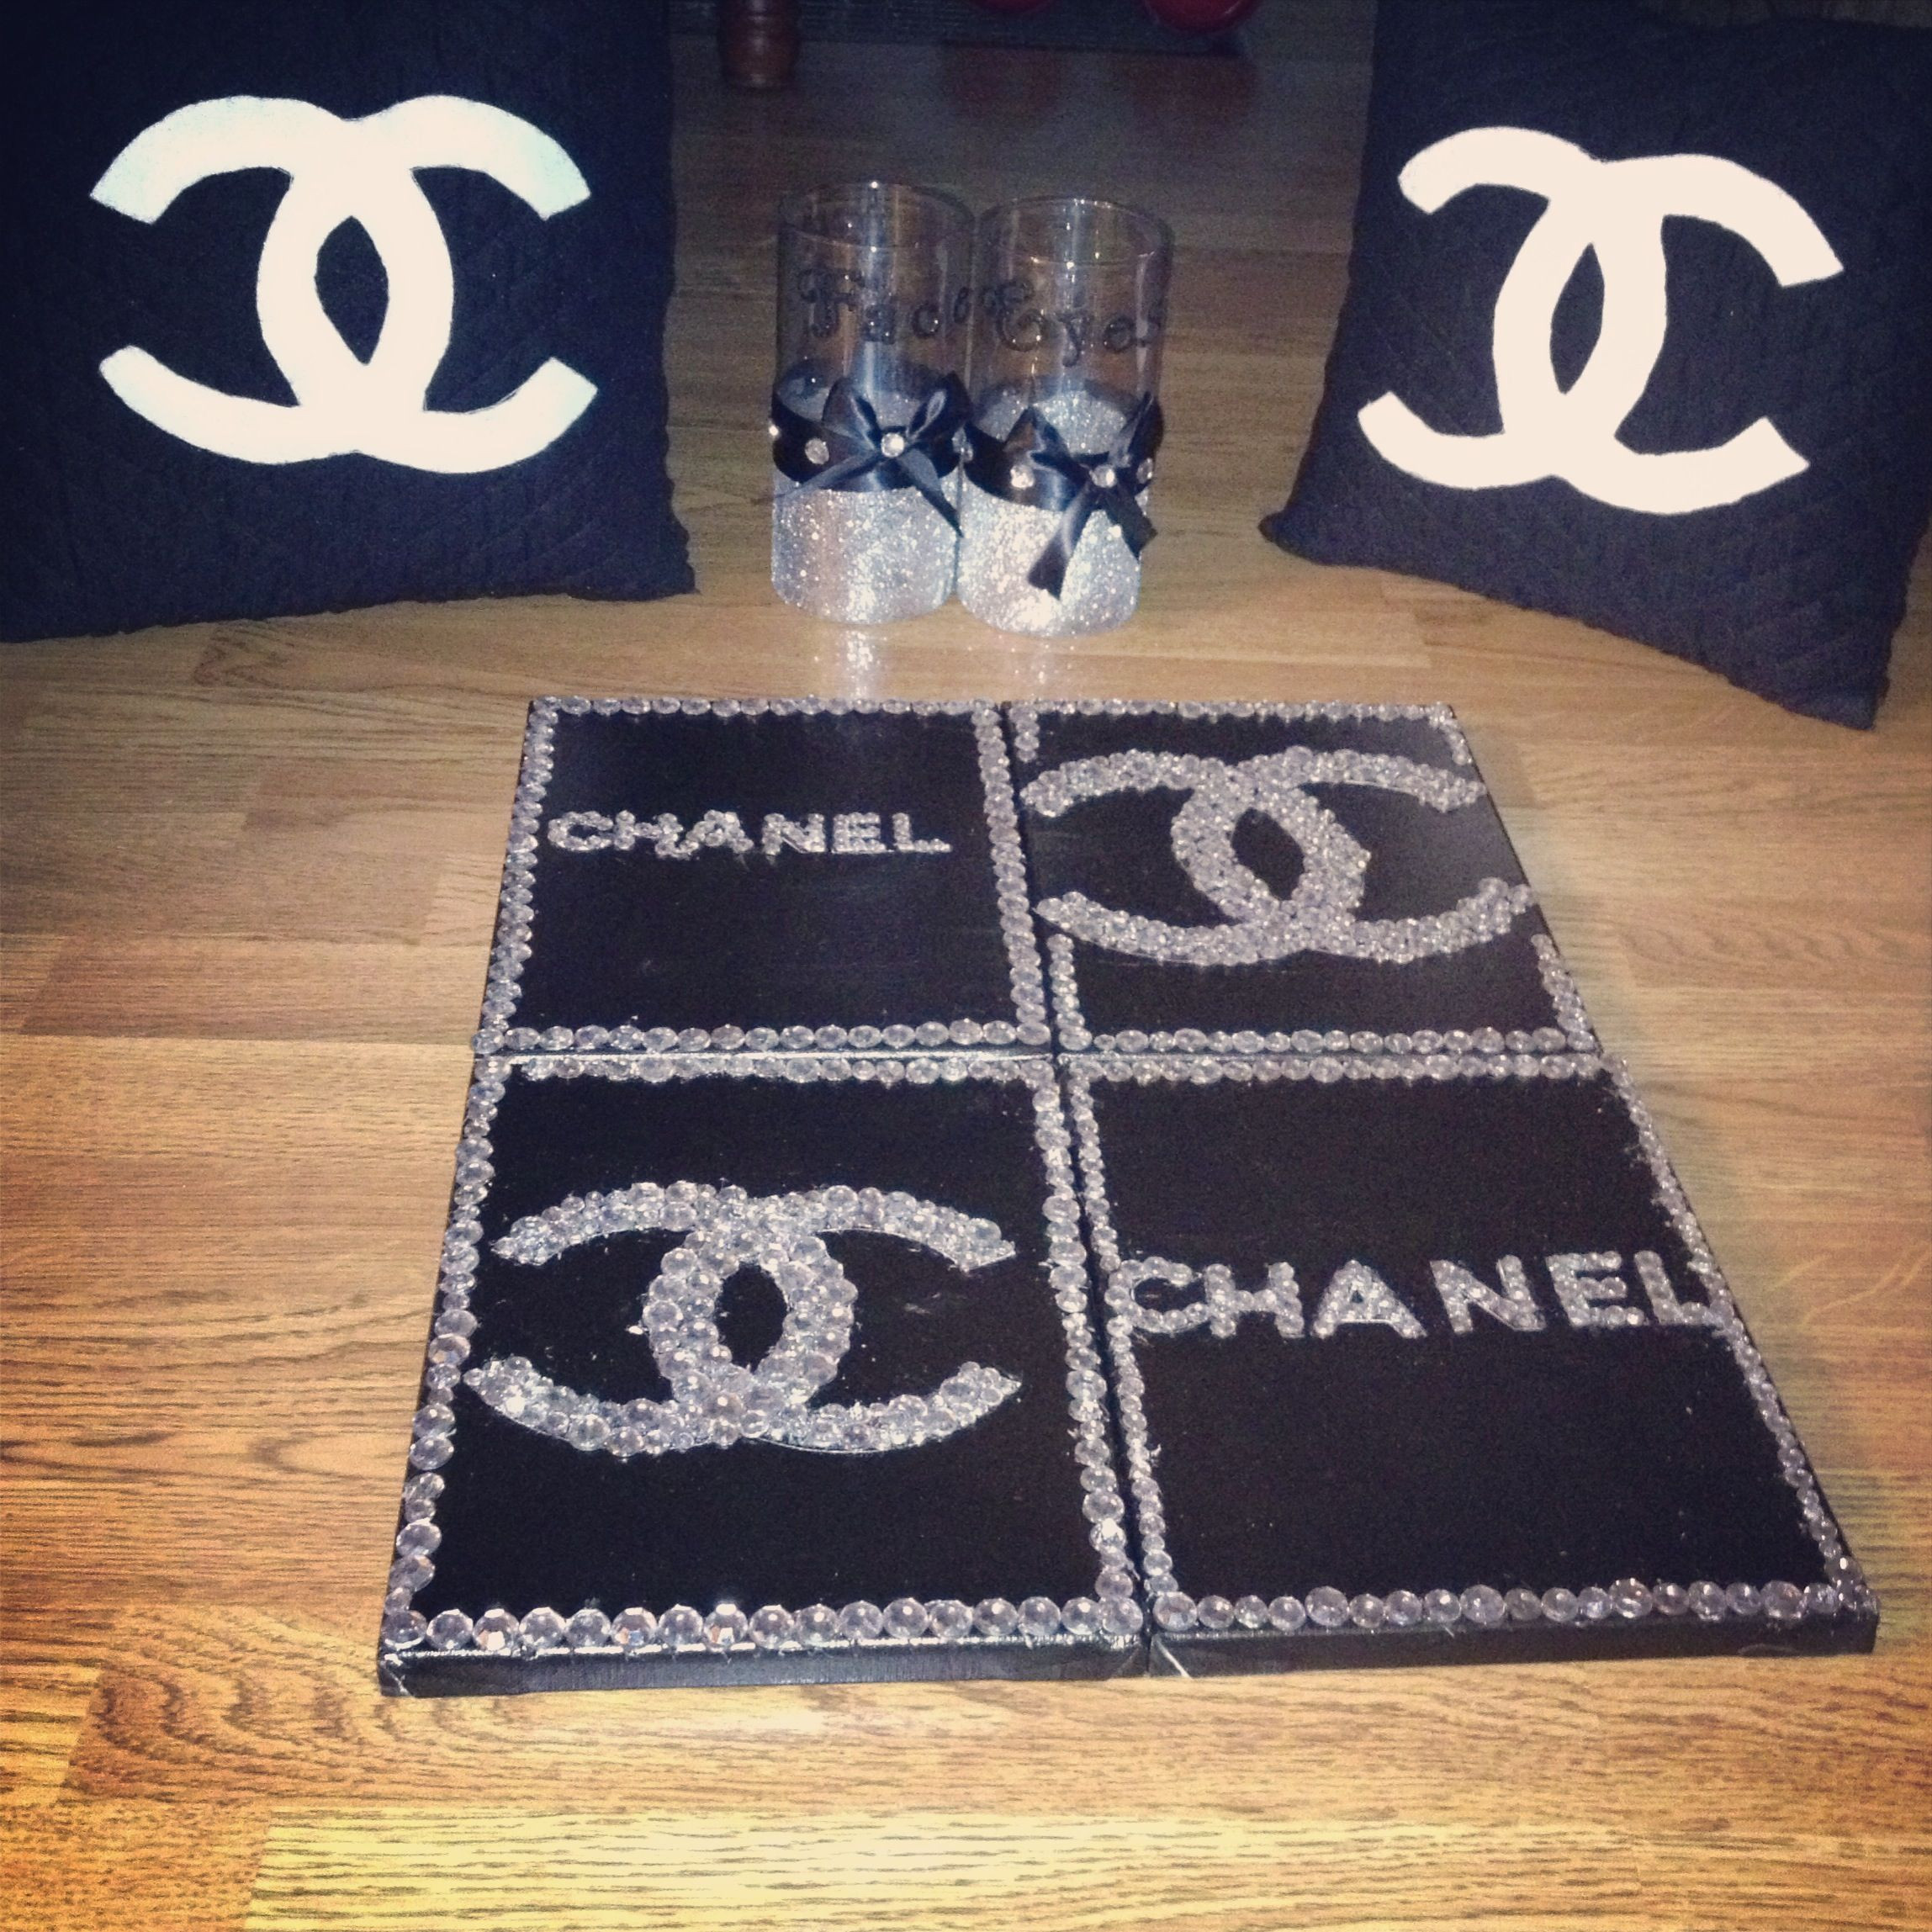 DIY Chanel Room Decor
 Really Proud How My DIY Chanel Room Decor Turned Out